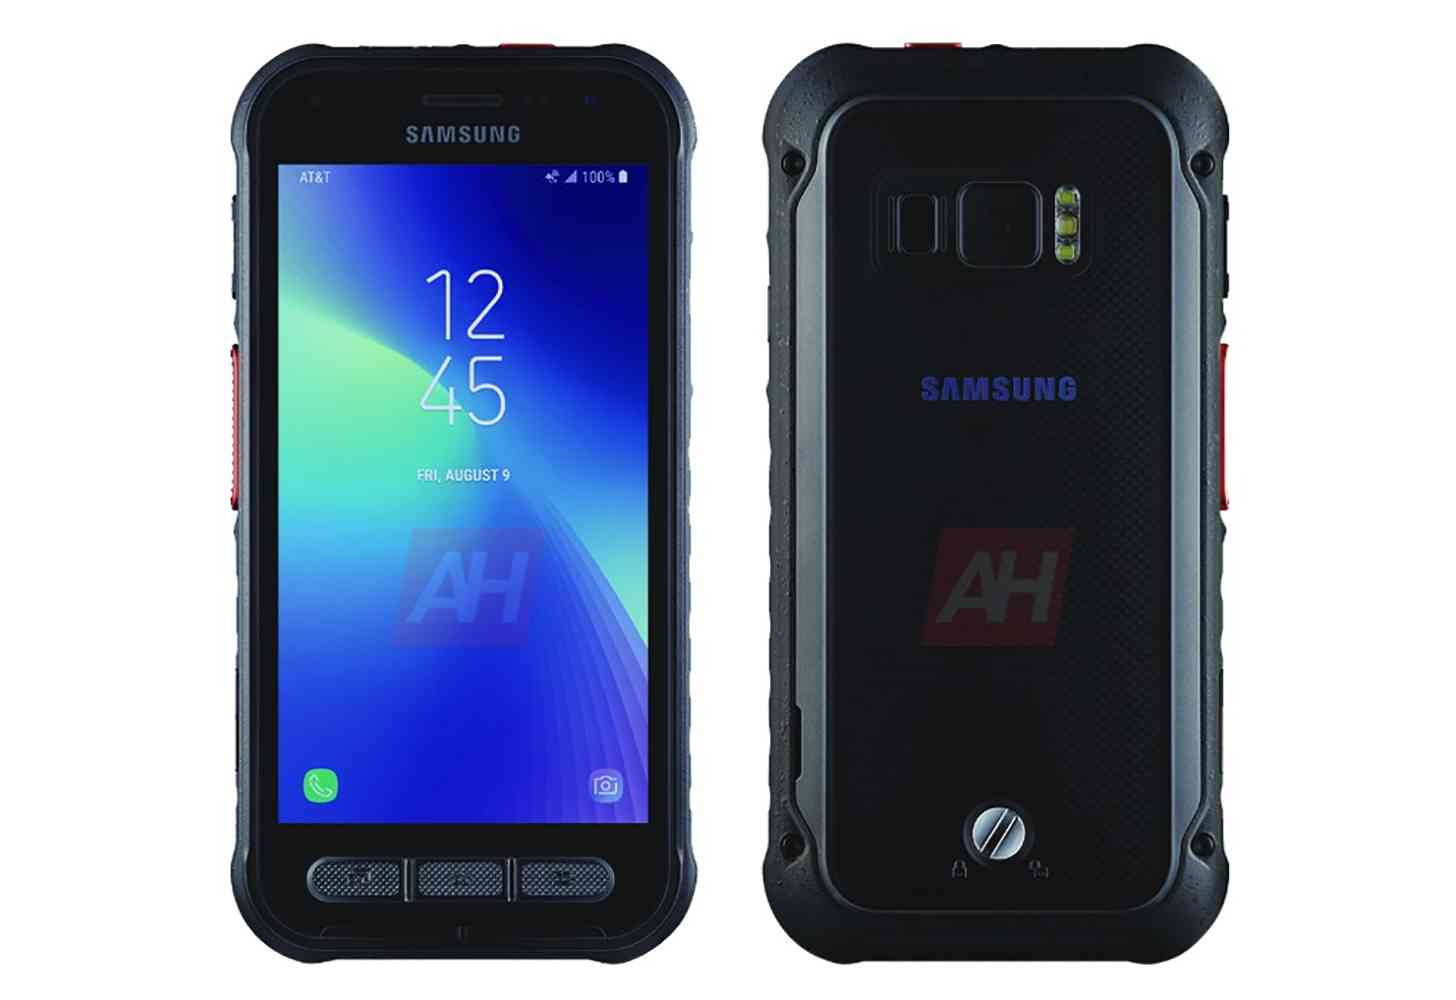 New Samsung Galaxy S Active phone for 